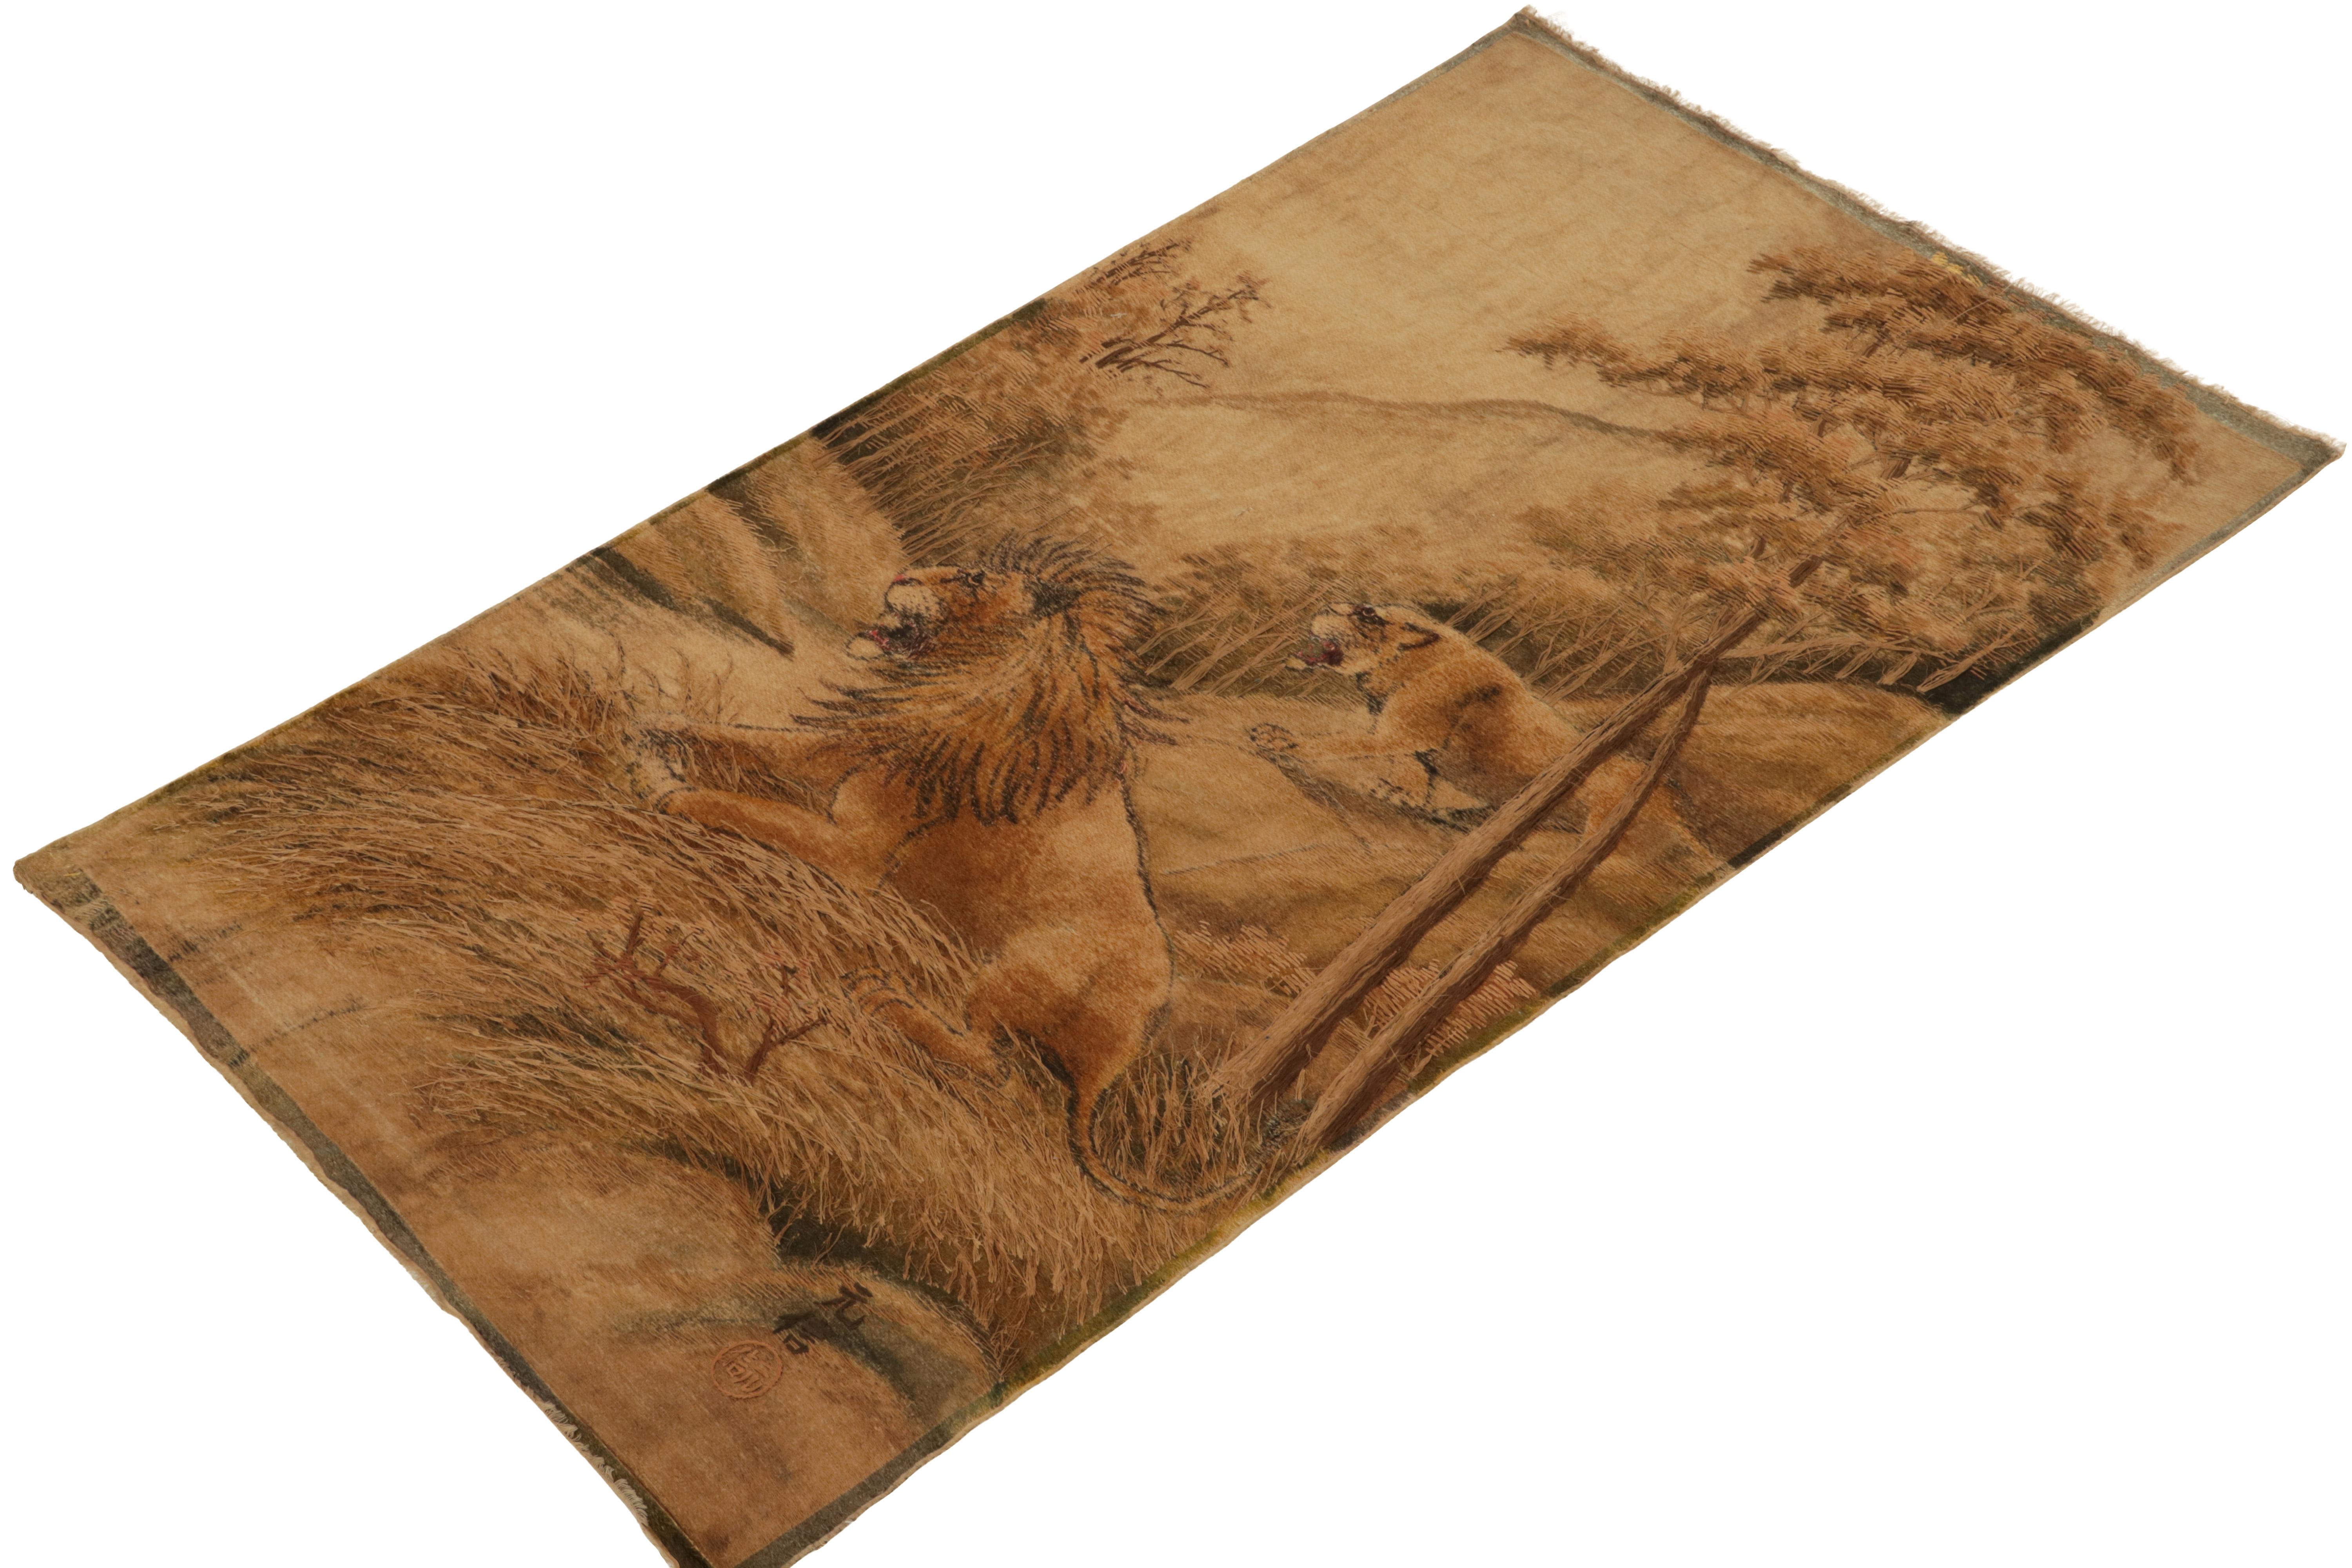 From the most collectible new curations, an antique 3x5 pictorial tapestry from Japan, handwoven in silk circa 1890-1900. 

On the Design: This coveted turn-of-the-century work enjoys a bold depiction of male and female lions in the wild. A subtle